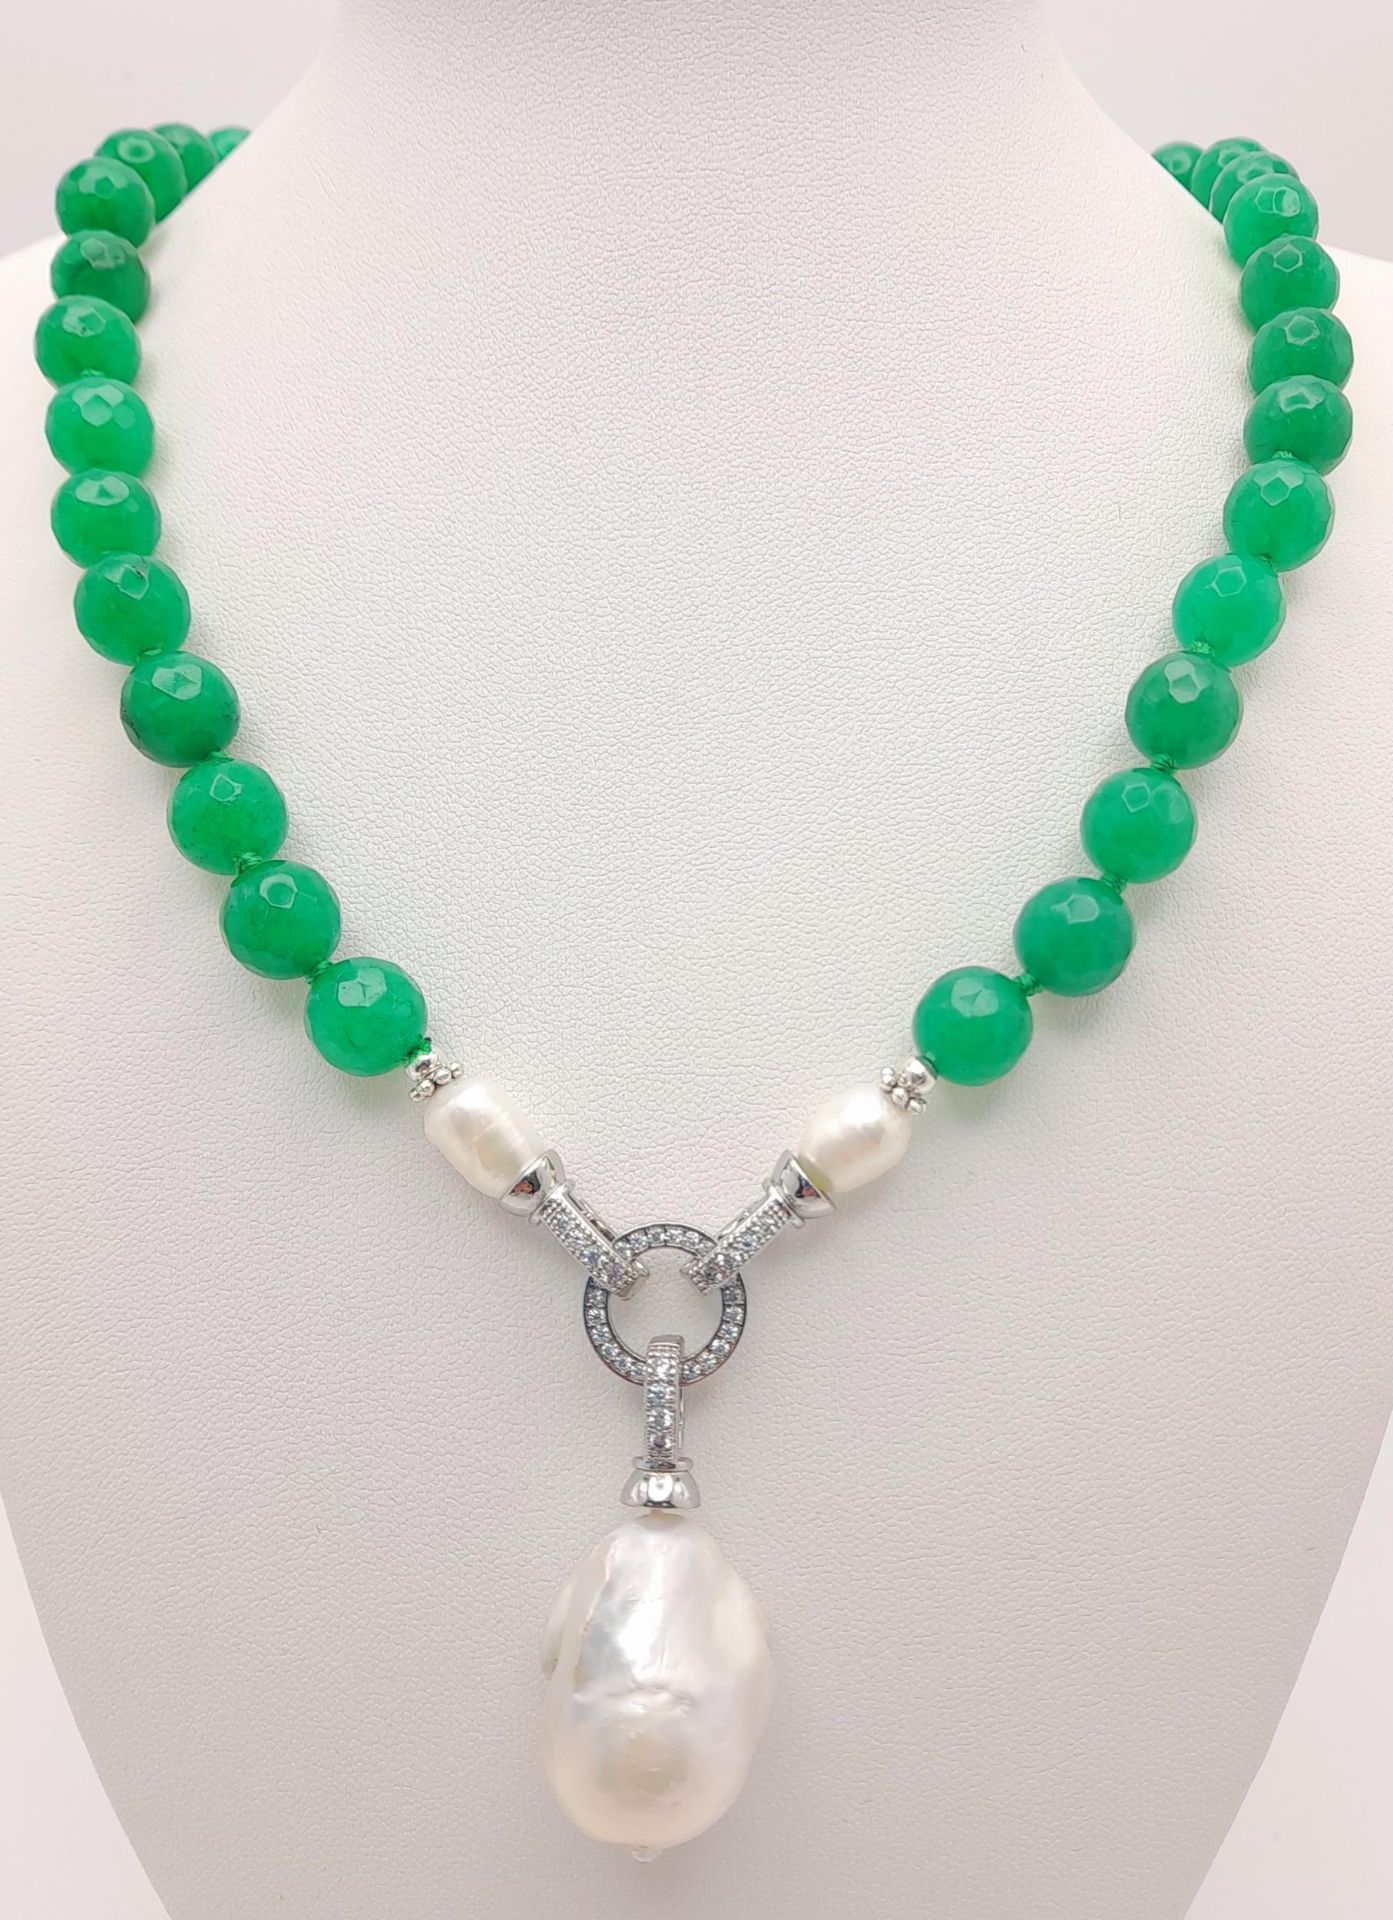 A Faceted Green Jade Necklace with Hanging Baroque Pearl Pendant. Cultured pearl and white stone